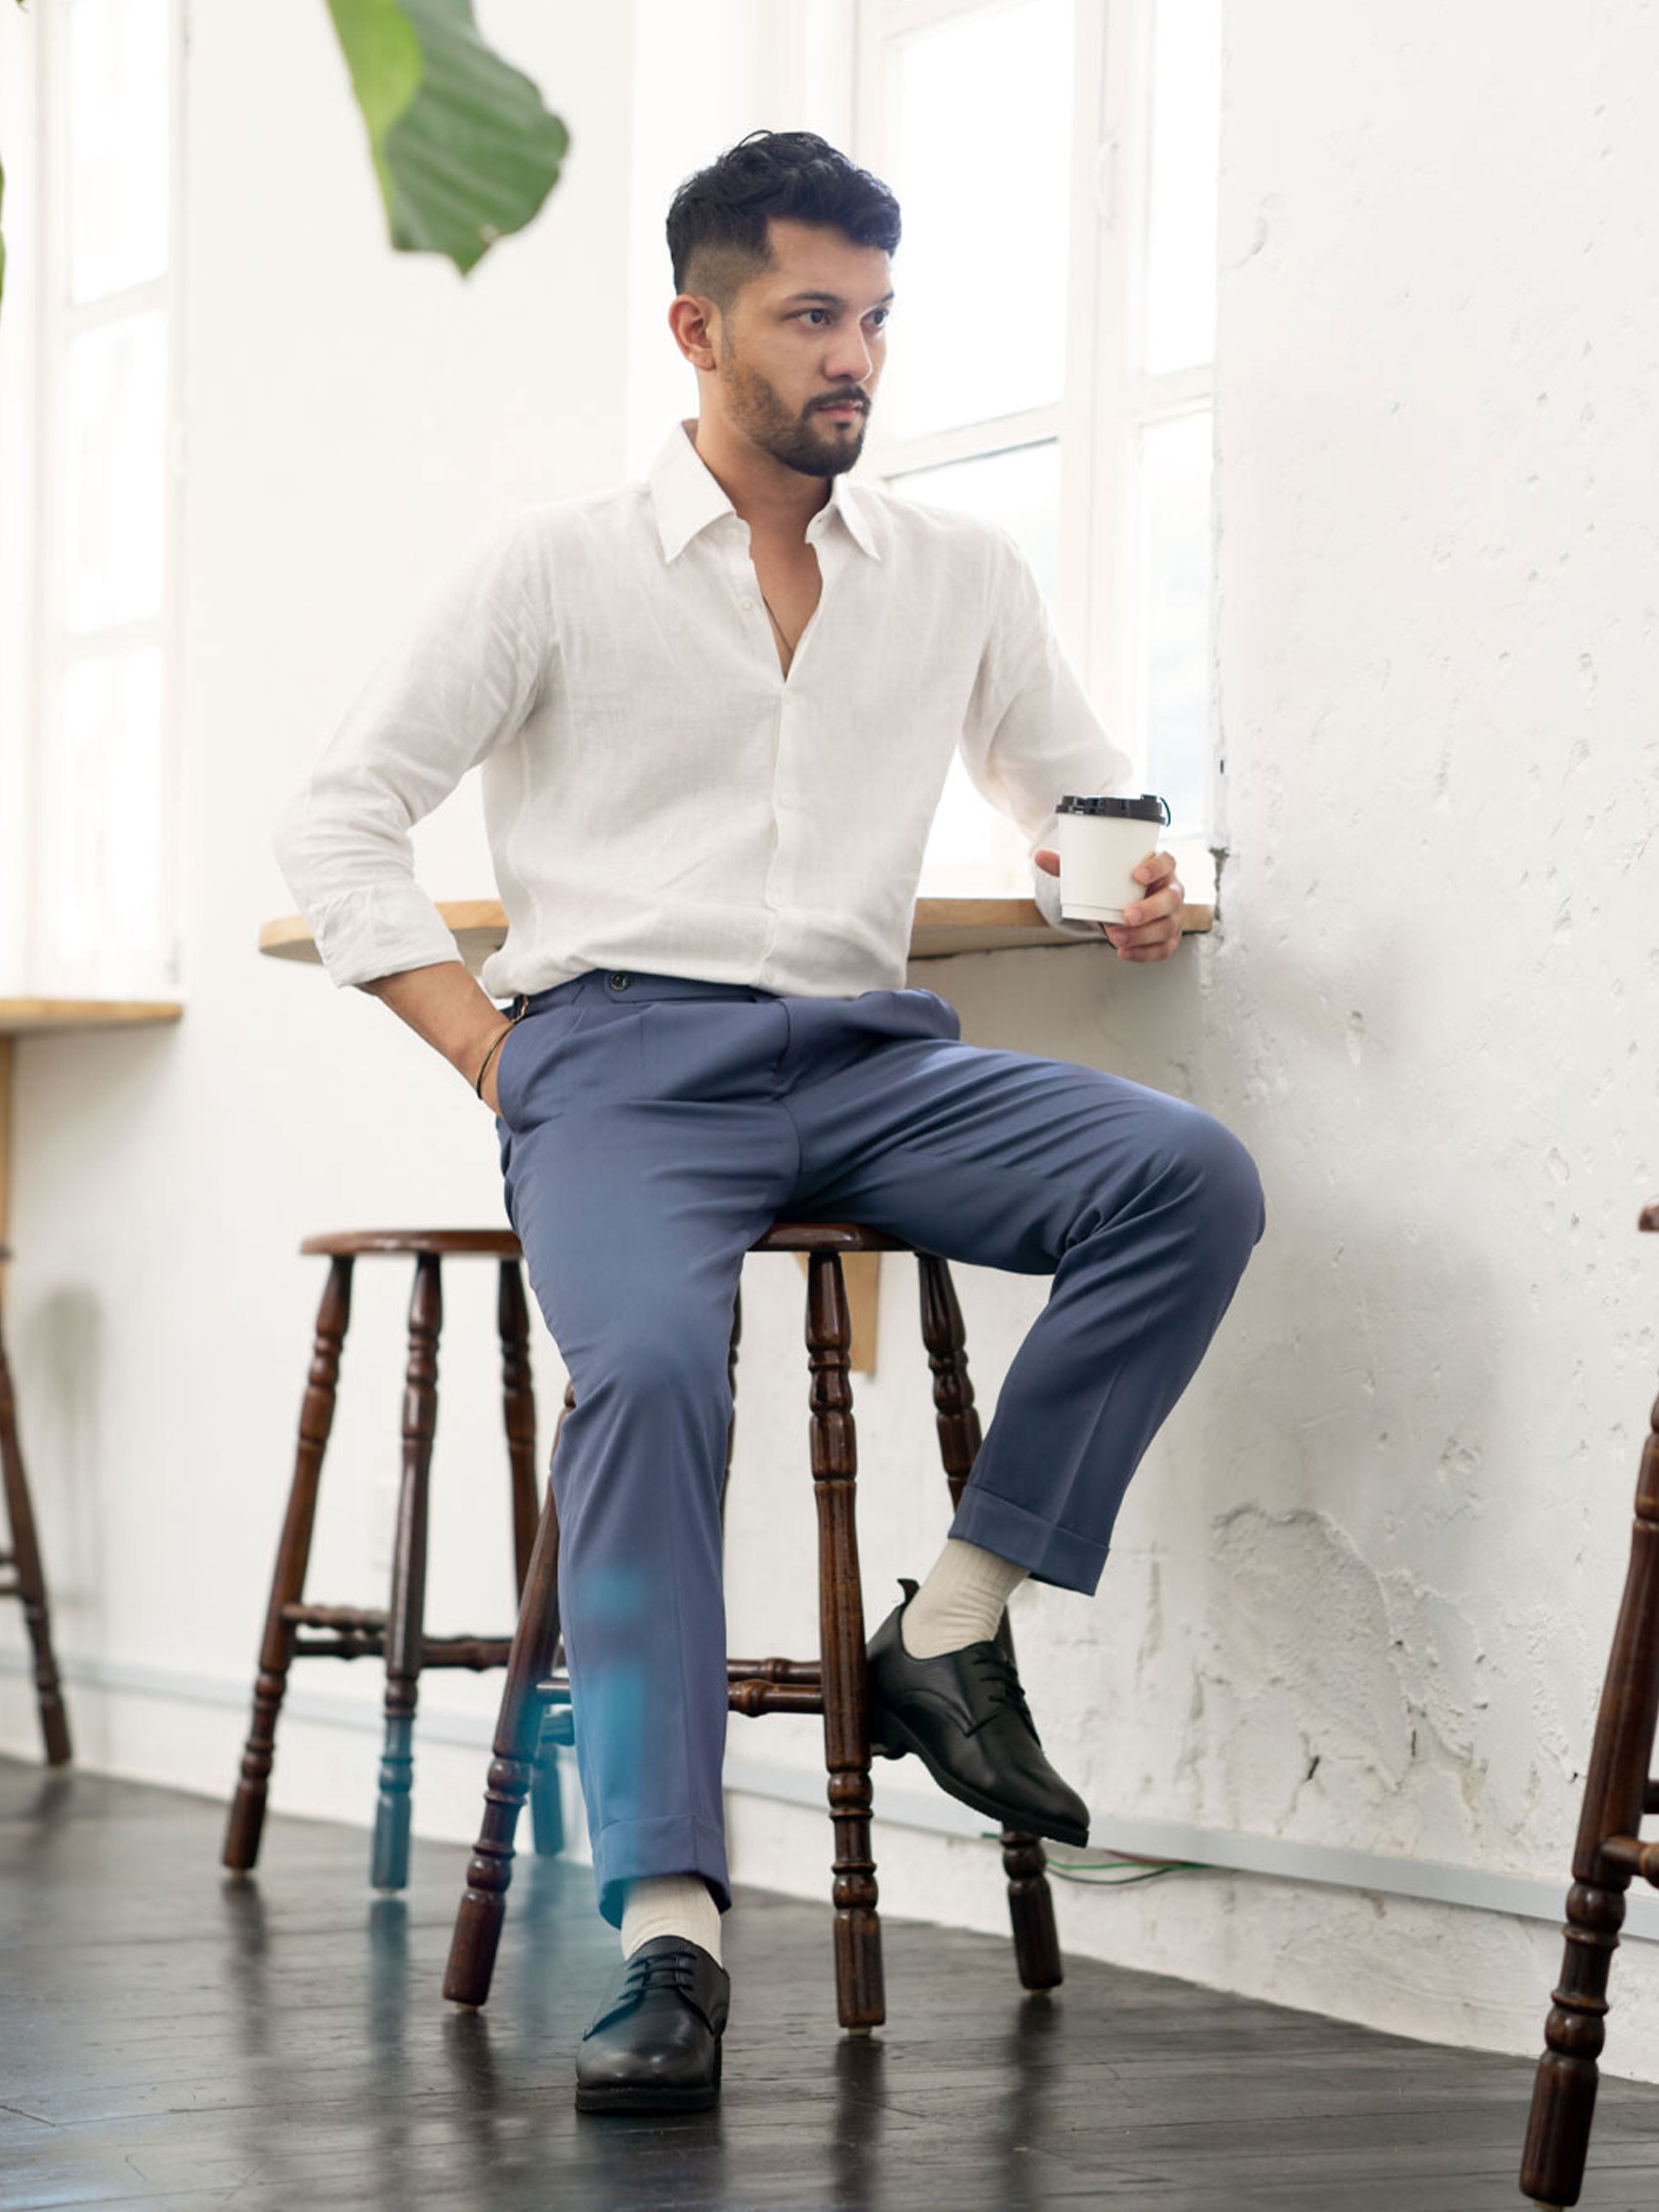 Trousers With Side Adjusters - Light Blue Plain Cuffed (Stretchable) - Zeve Shoes